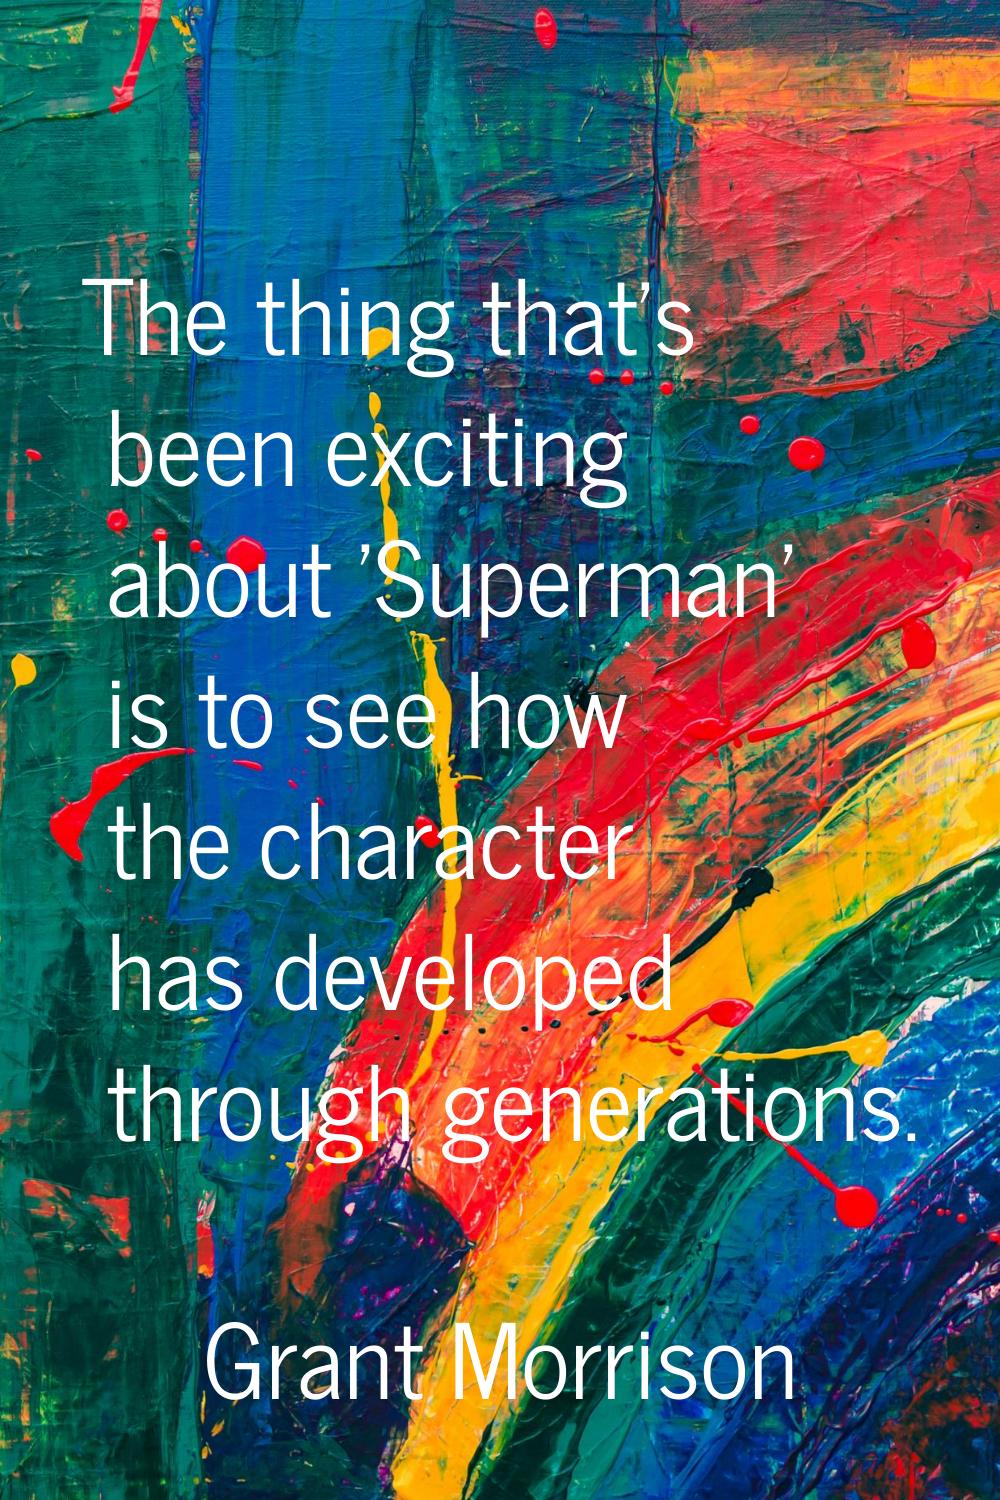 The thing that's been exciting about 'Superman' is to see how the character has developed through g